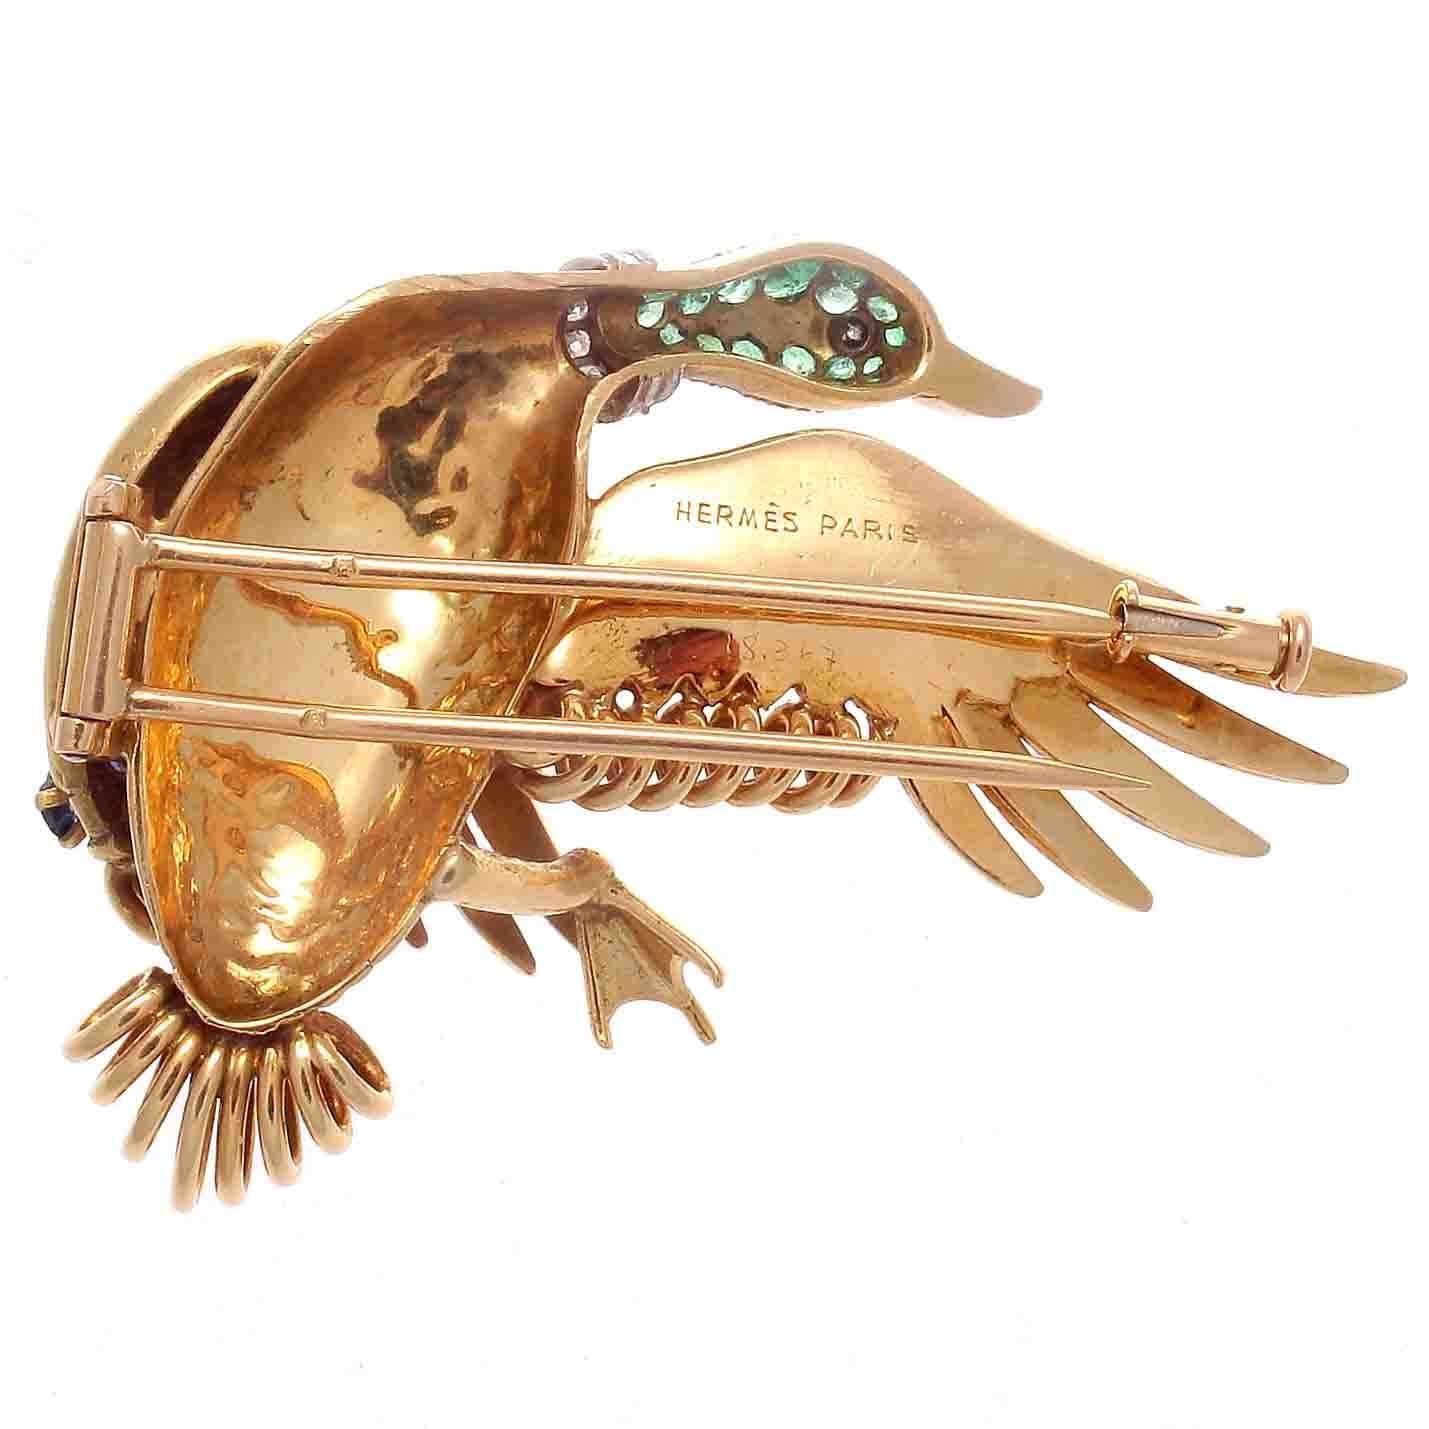 Established in 1837 the French fashion luxury goods manufacturer is known for its attention to detail.  Their style and expertise is appreciated the world over. The brooch is a perfect example of the Hermes look. Featuring a whimsical gliding goose